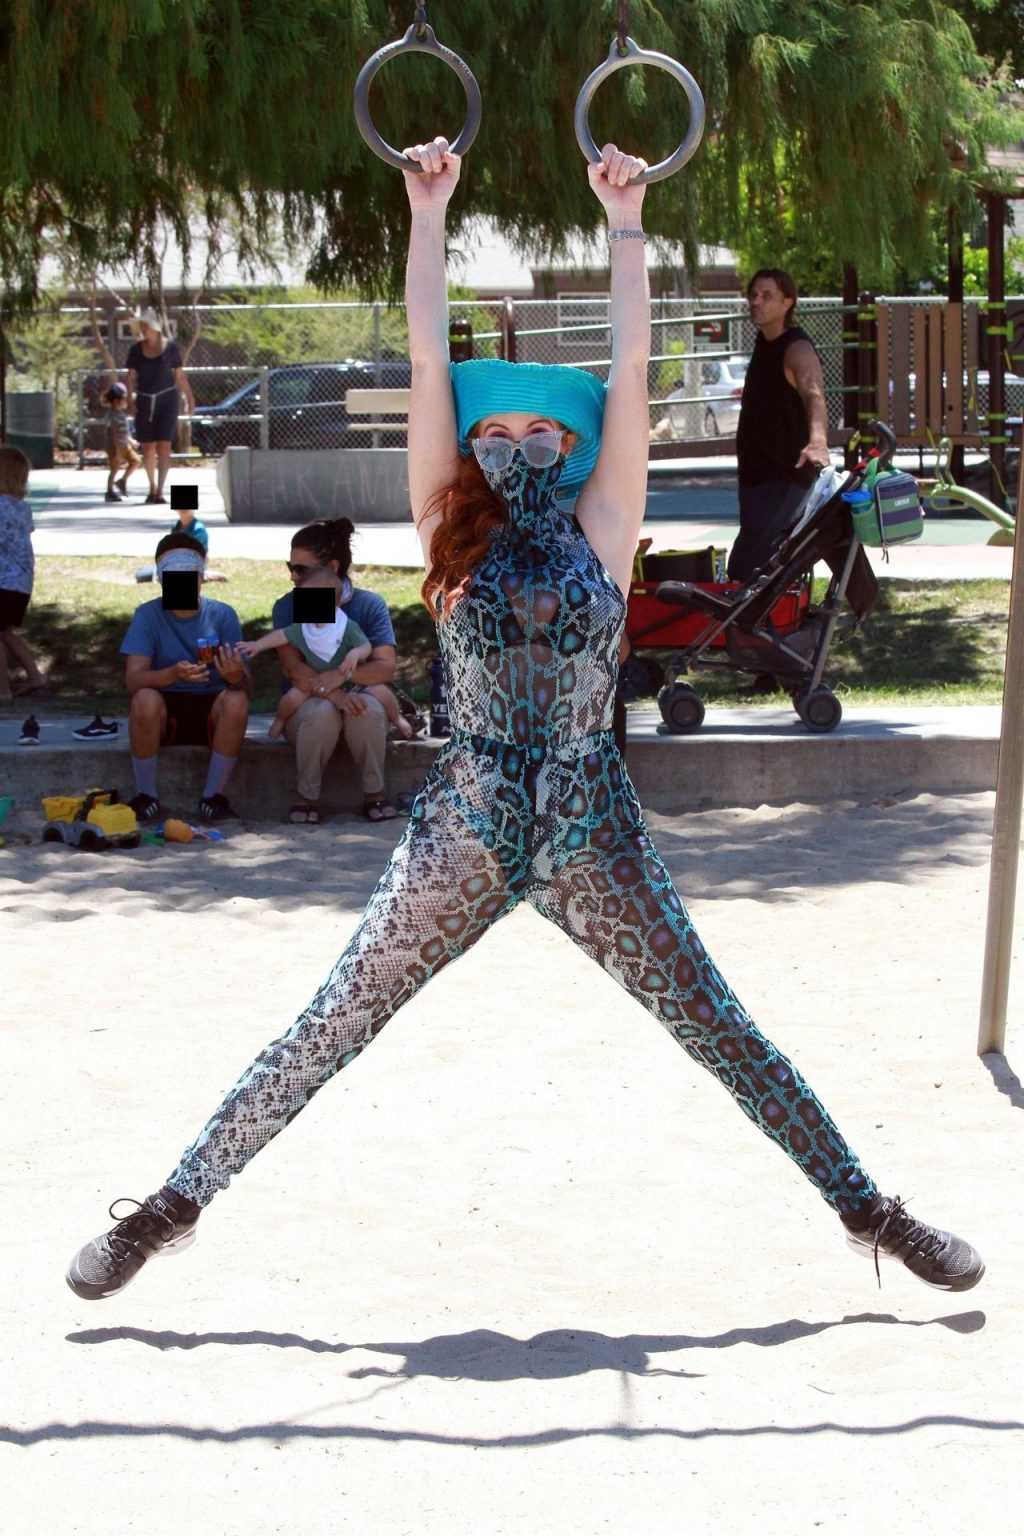 Phoebe Price Sports a Turquoise Animal Print Outfit for Her Workout (42 Photos)